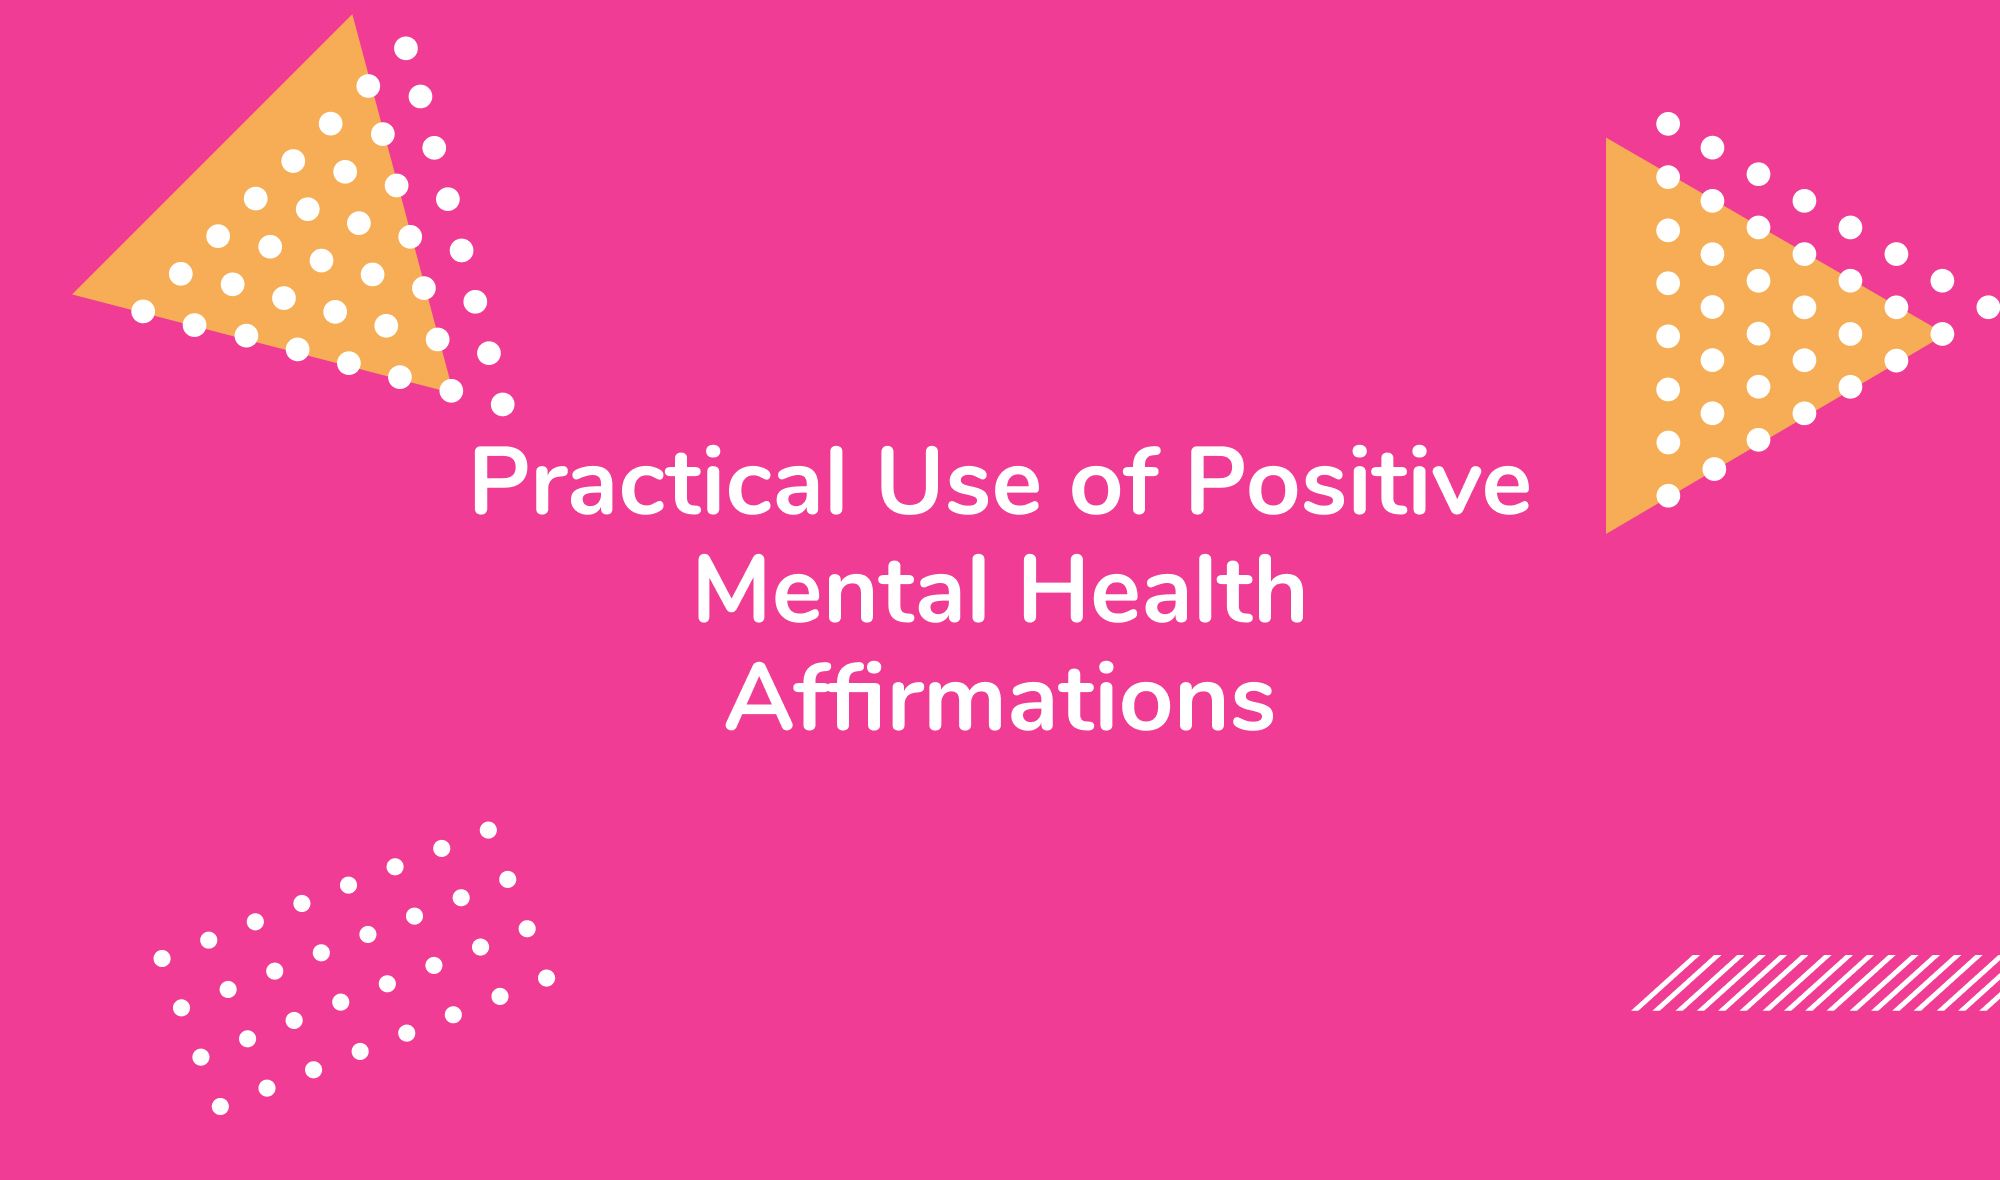 Practical Use of Positive Mental Health Affirmations